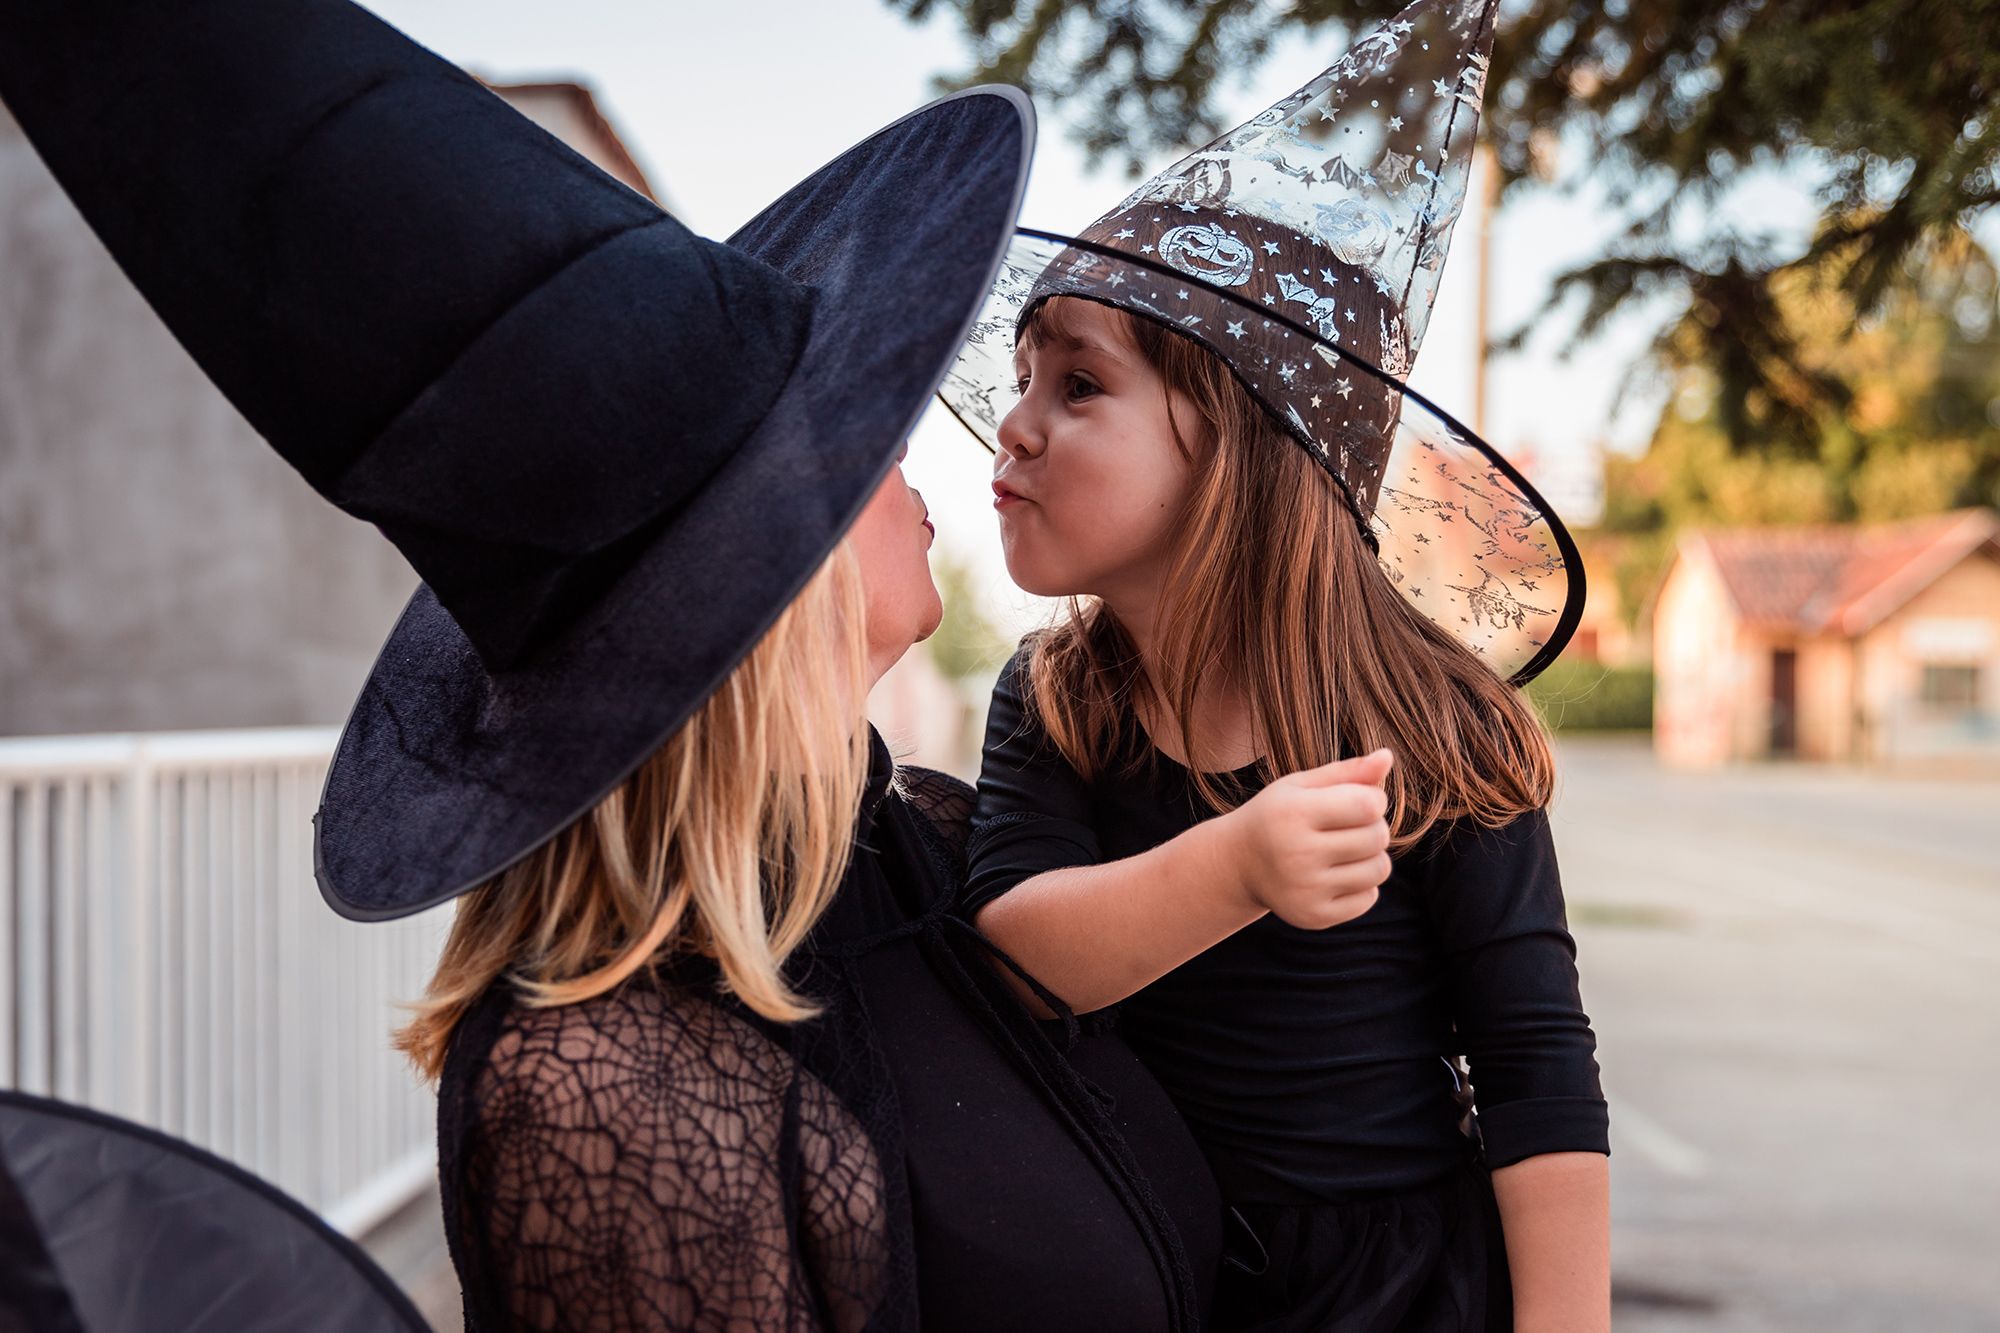 The Cutest Hocus Pocus Family Halloween Costume - With the Blinks